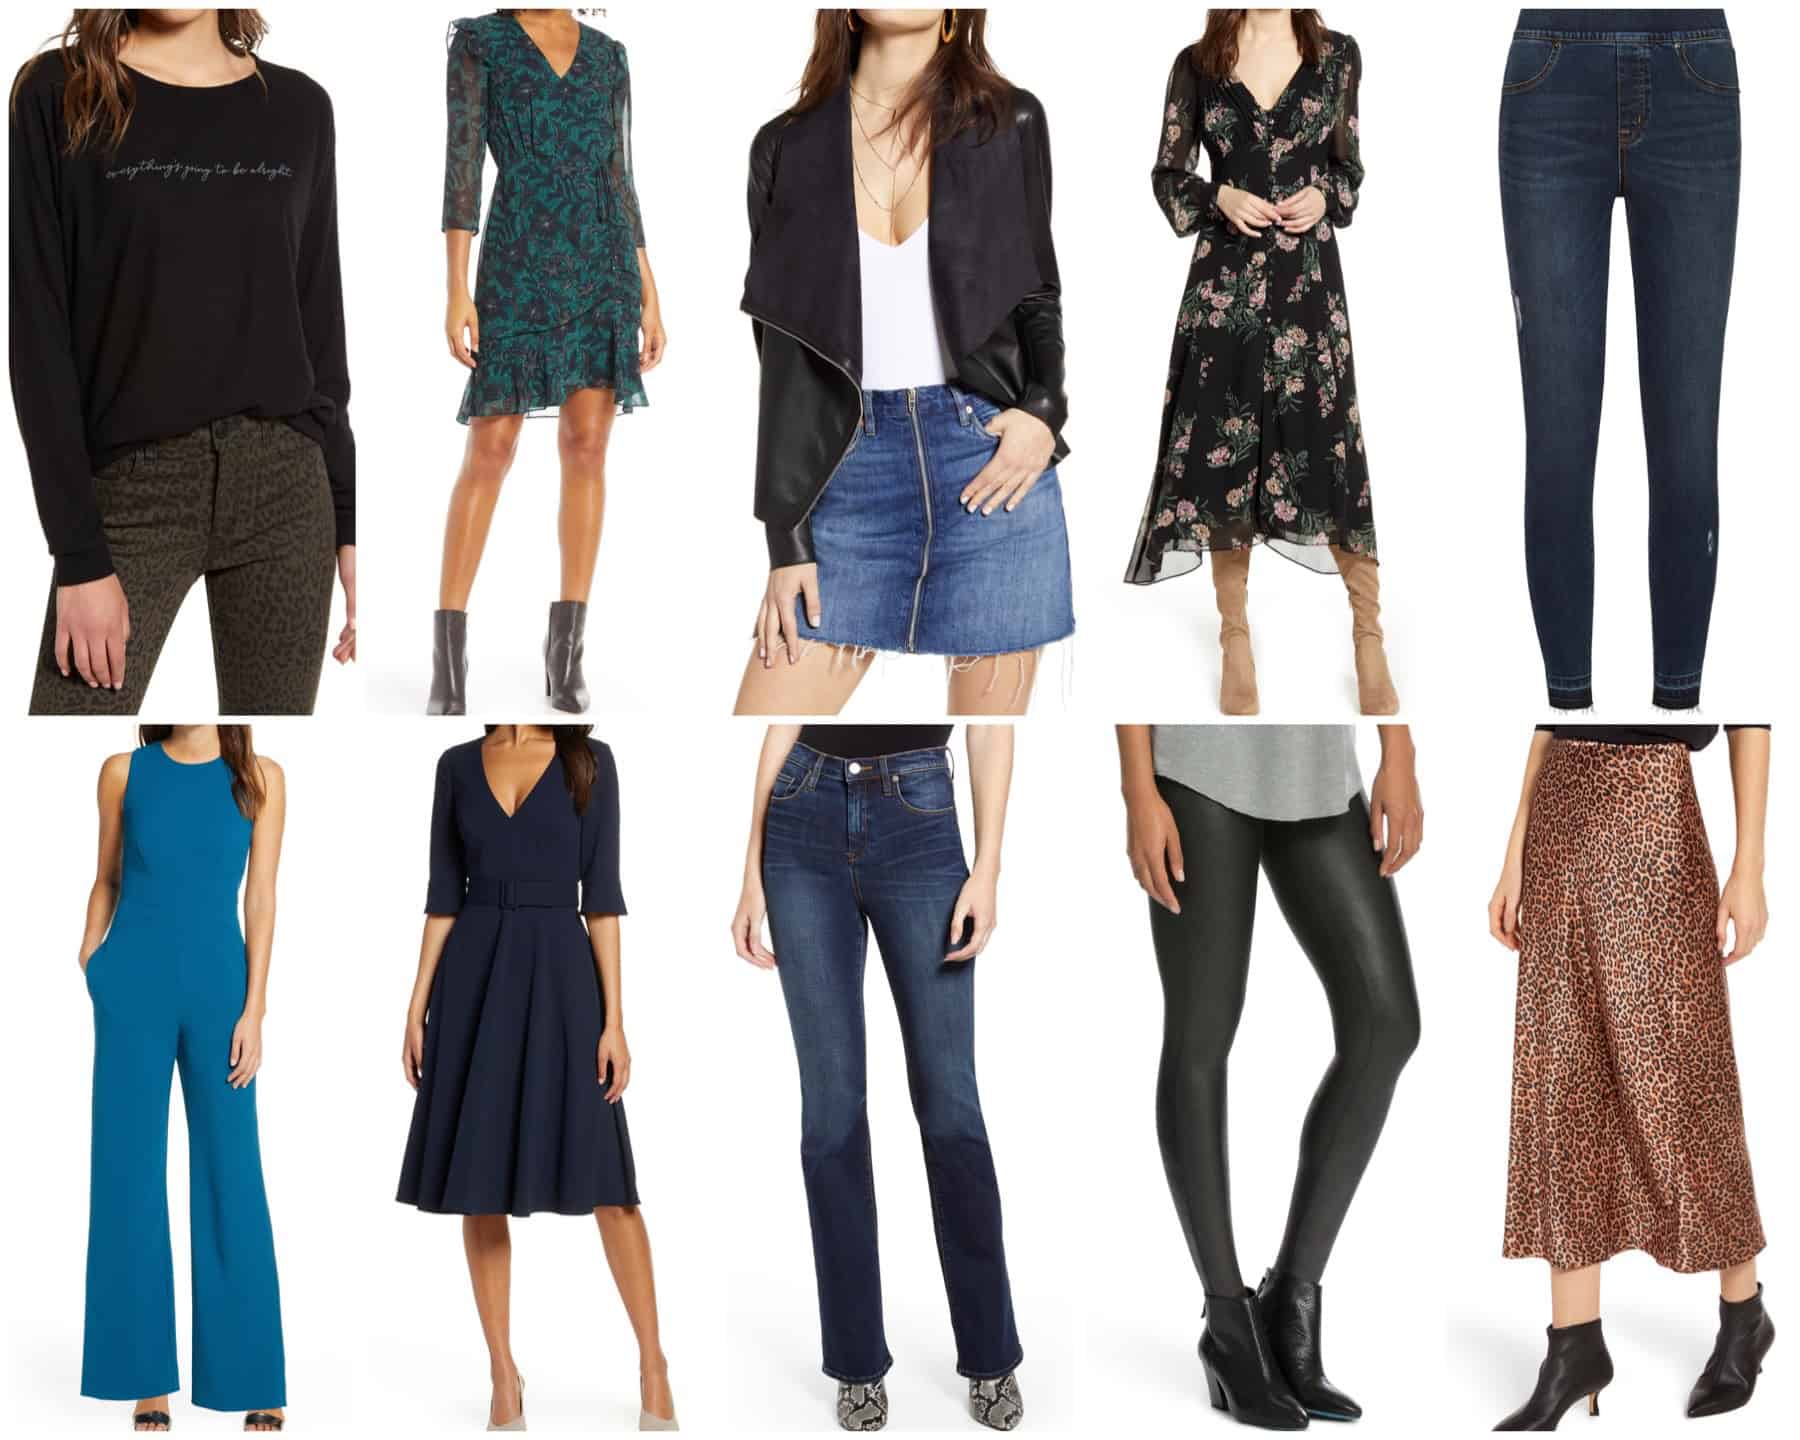 10 Amazing Finds Under $100 From The Nordstrom Anniversary Sale